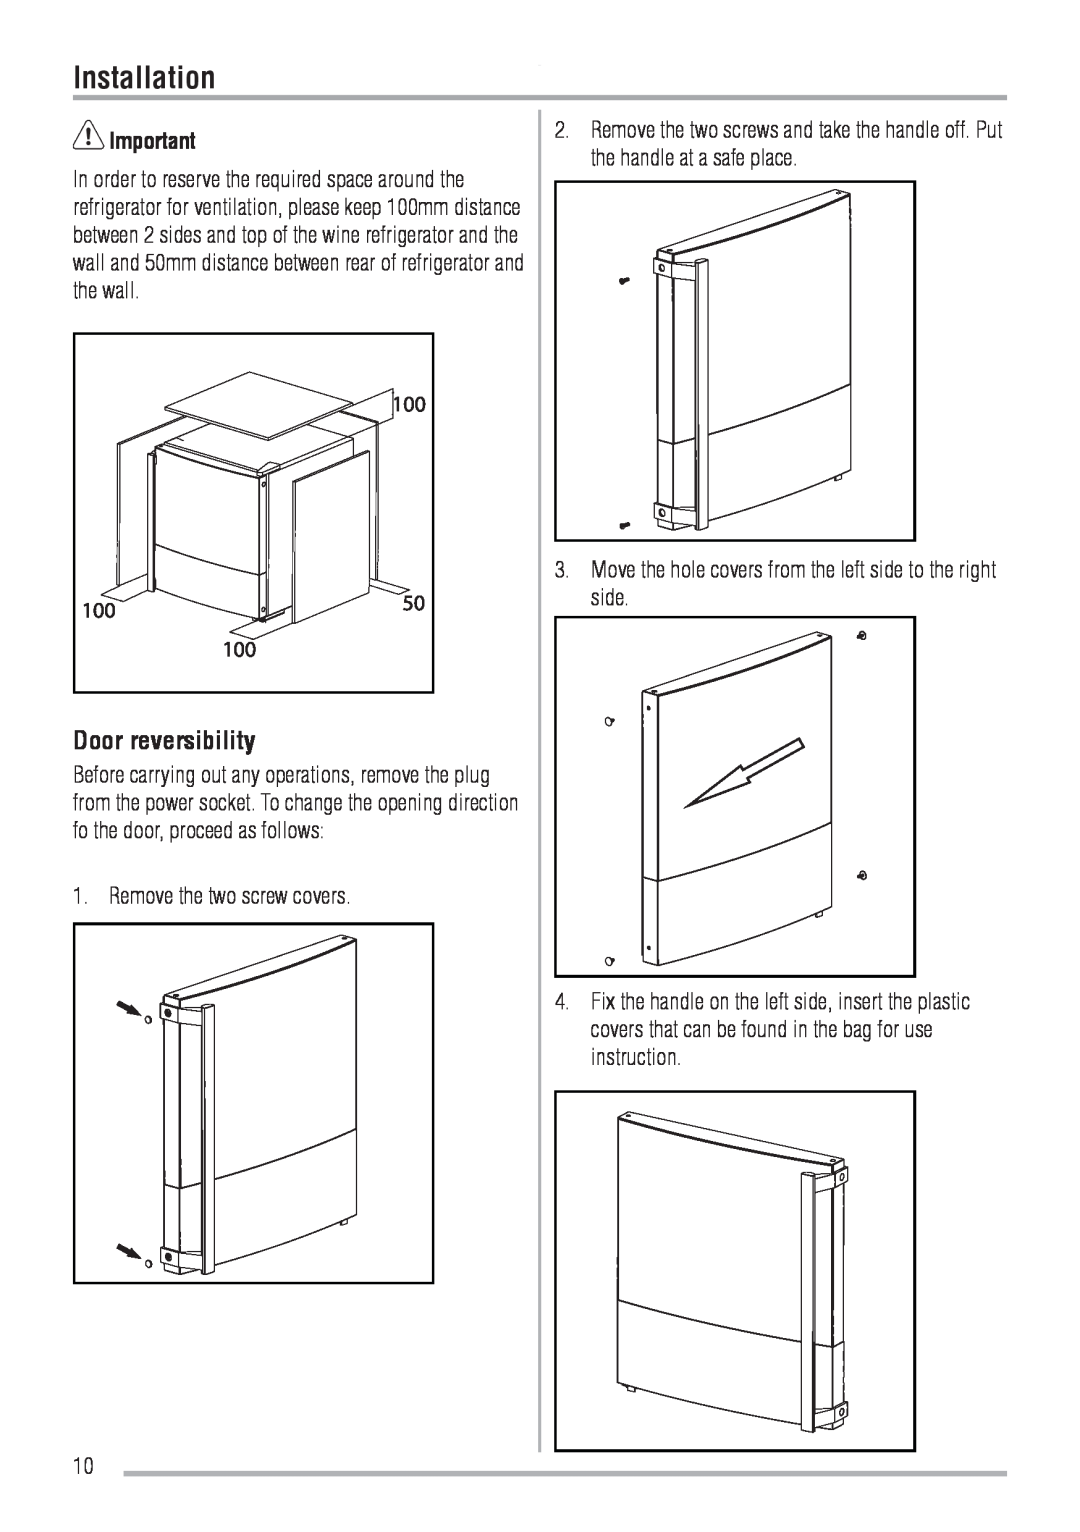 Zanussi ZRW106N user manual Installation, Door reversibility, Remove the two screw covers 